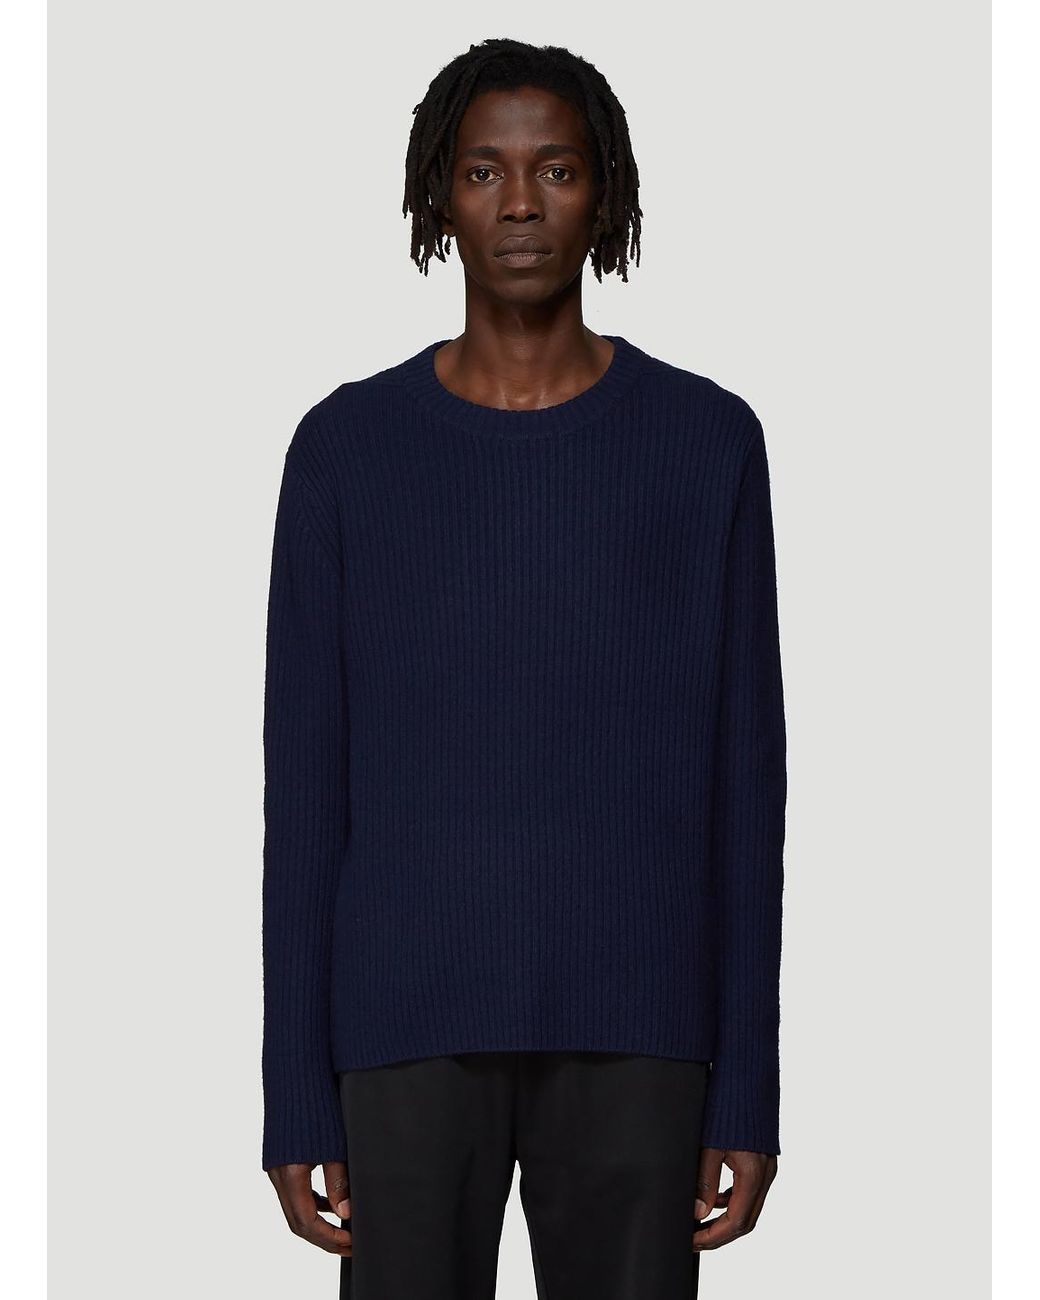 Acne Studios Wool Ribbed Crewneck Sweater In Navy in Blue for Men - Lyst